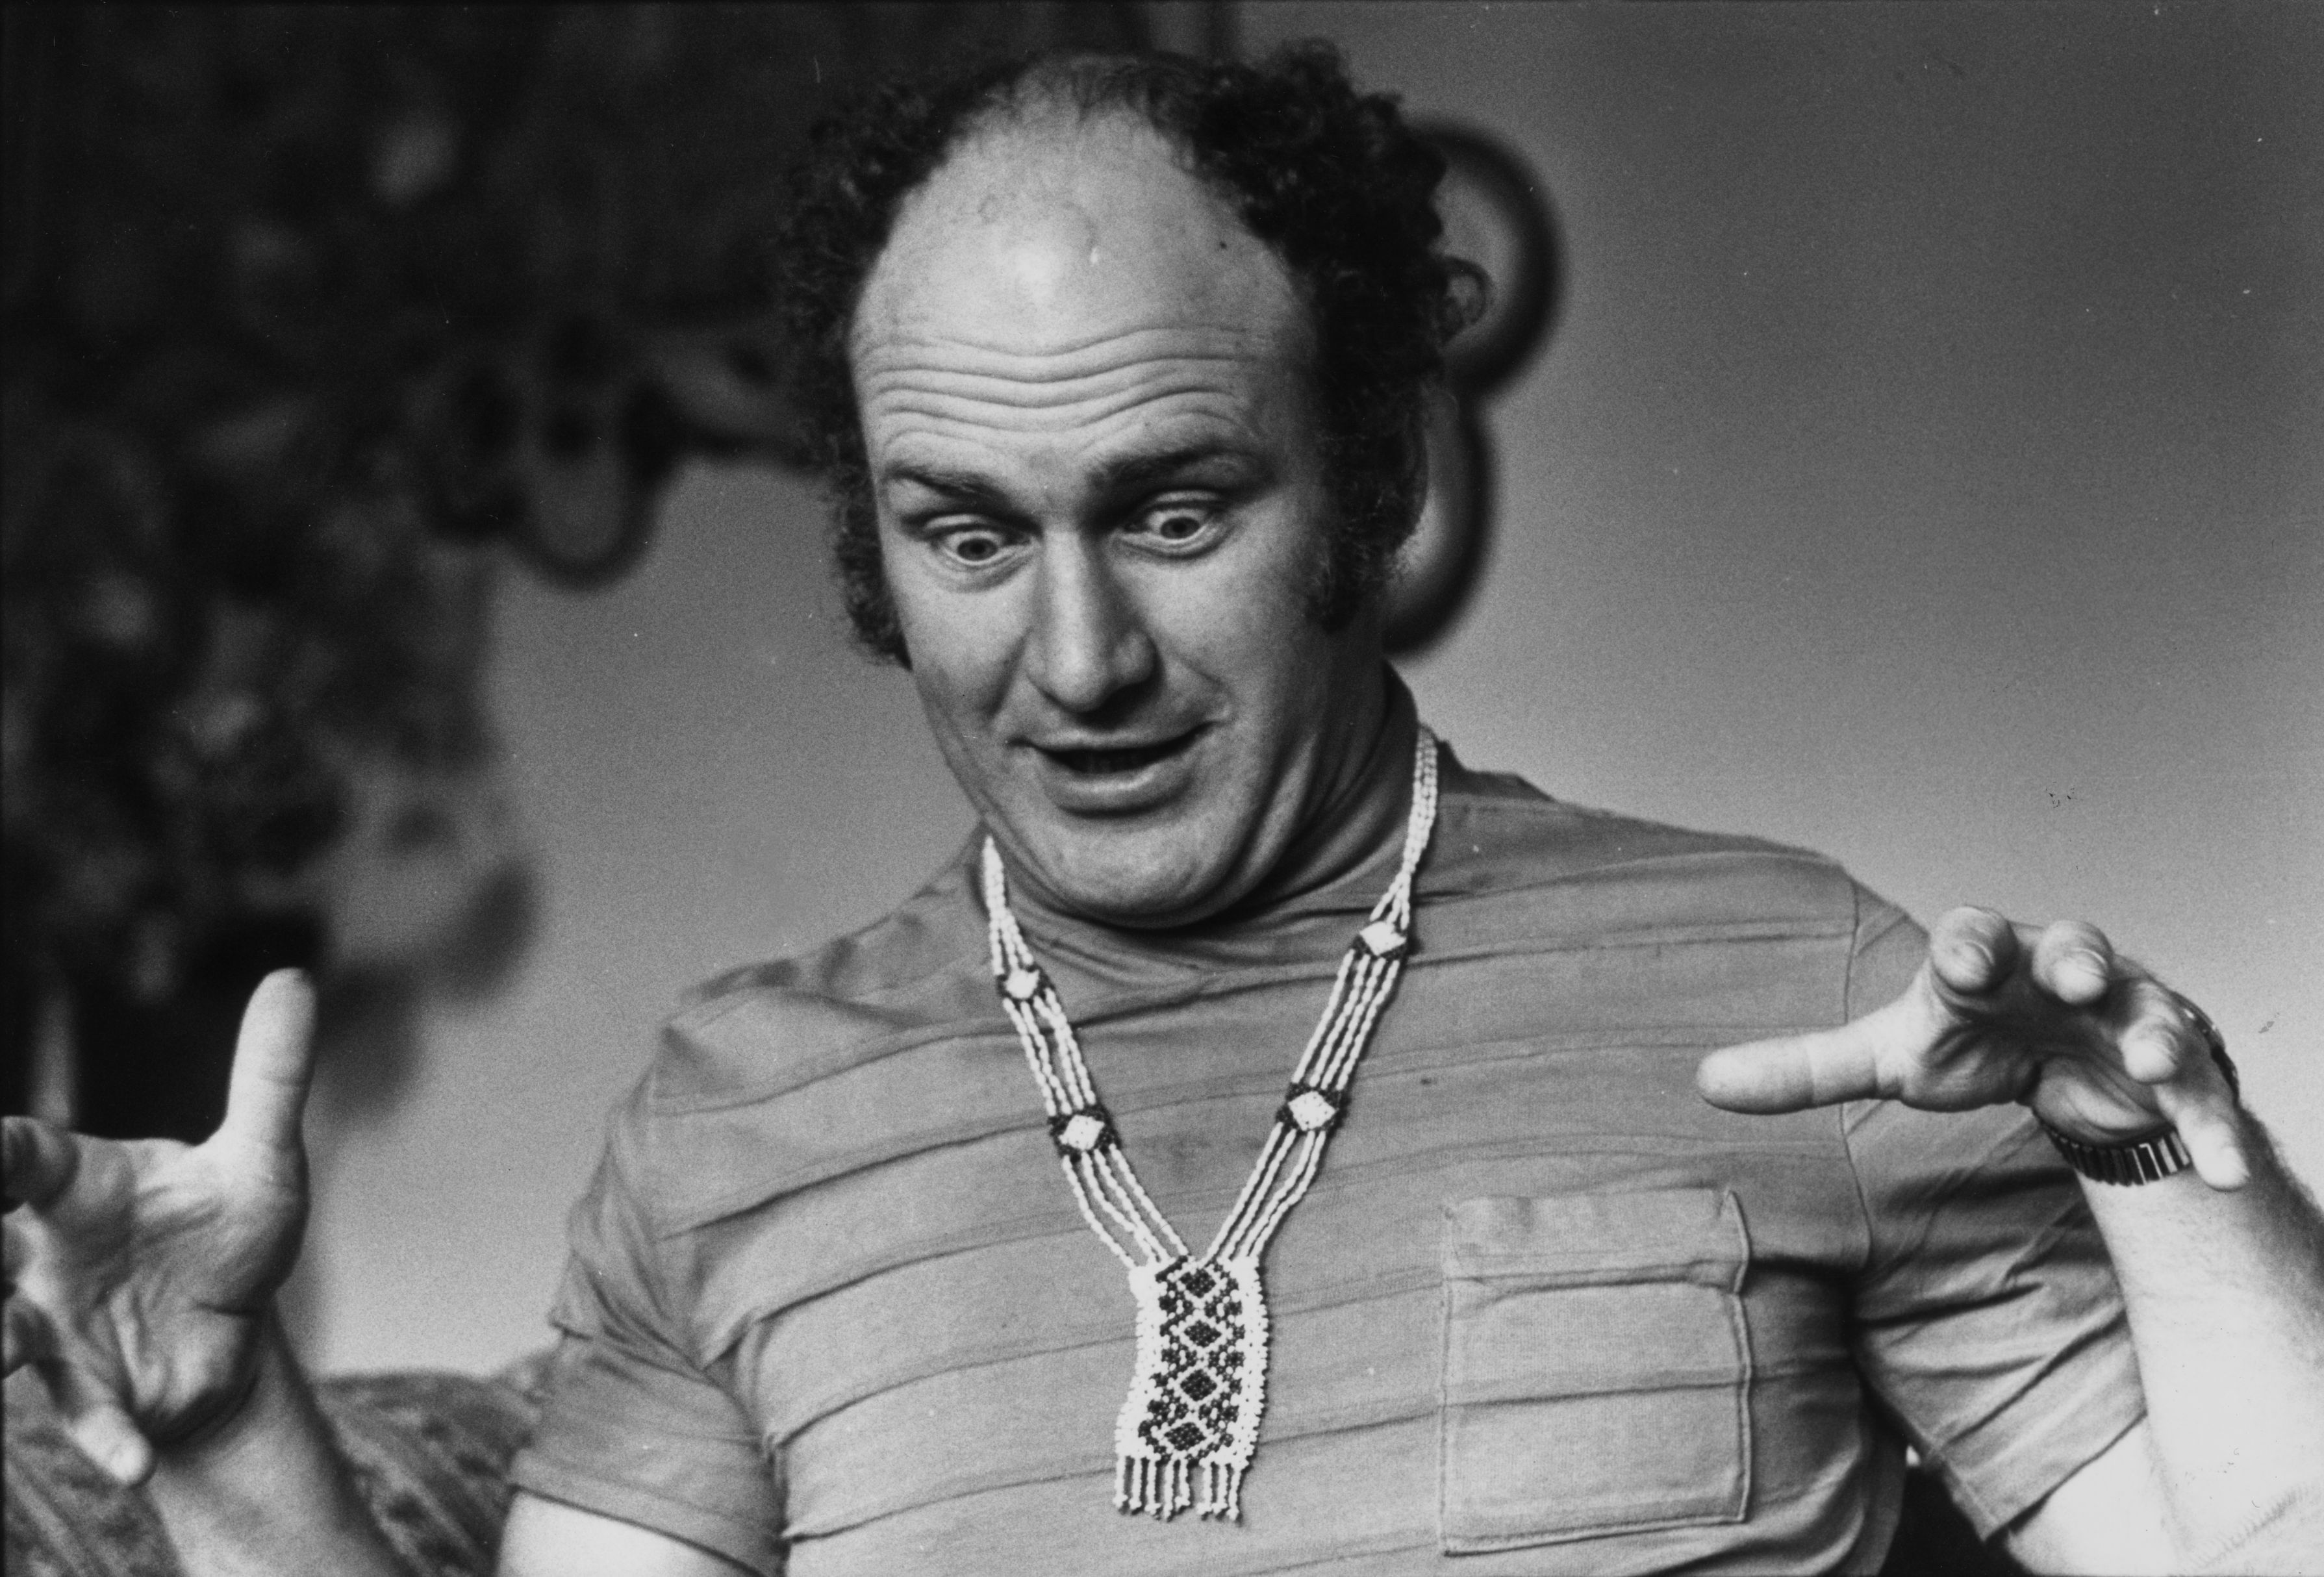 10th May 1969: Ken Kesey (1935 - 2001), American author of 'One Flew Over The Cuckoo's Nest' and 'Sometime's A Great Notion'. (Photo by Roy Jones/Evening Standard/Getty Images)